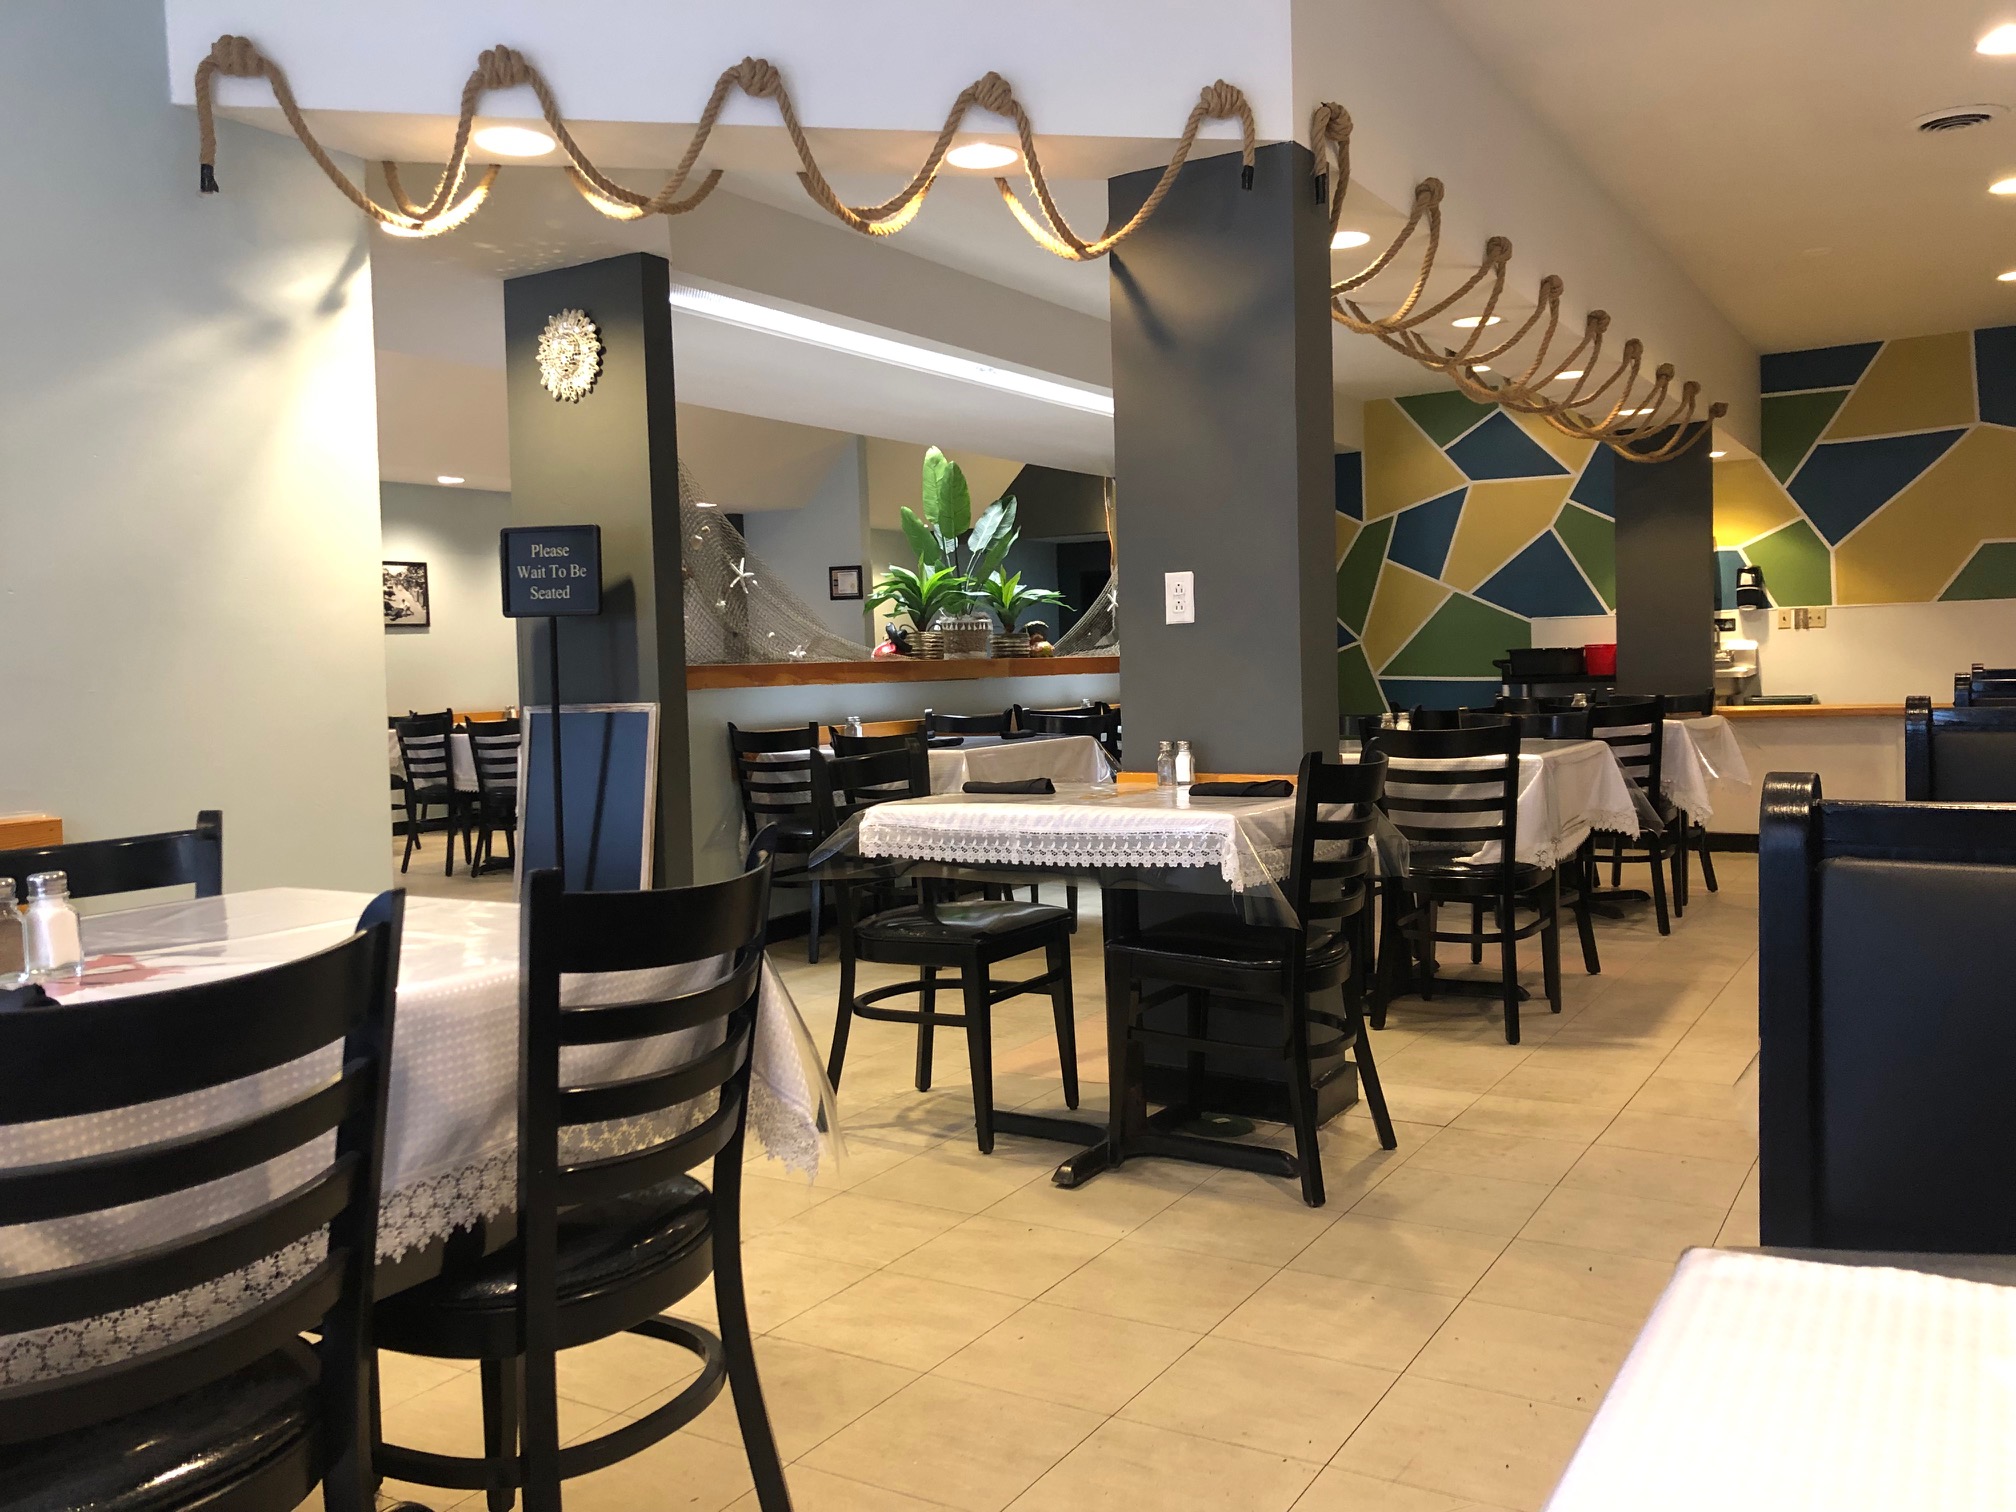 Inside La Bahia Grill, there are empty tables with white table cloths and black metal chairs. There is a feature wall with brightly colored interlocking shapes and nautical themes. Photo by Alyssa Buckley.